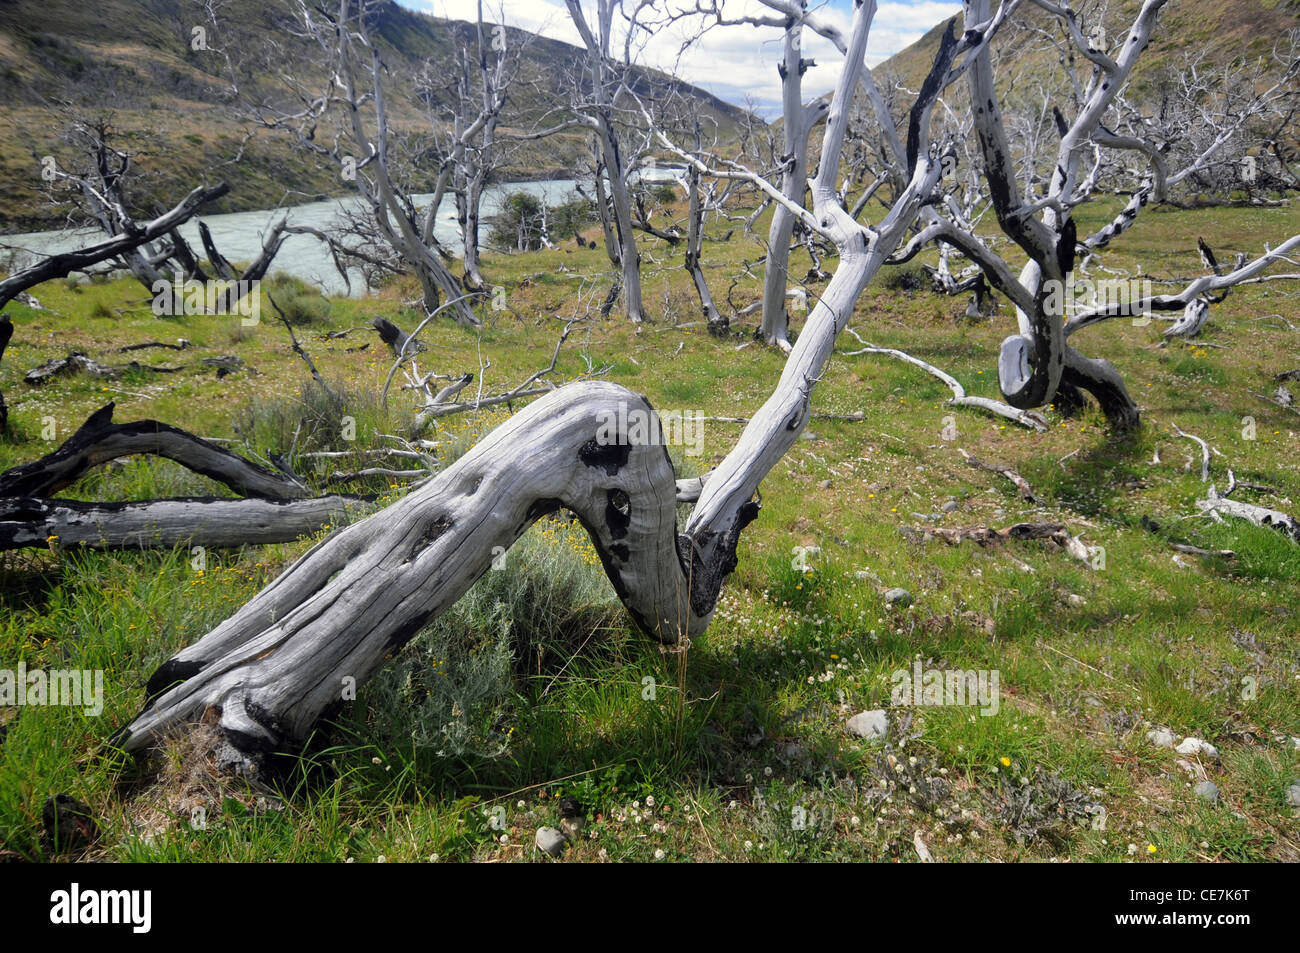 Lenga (Nothofagus) trees killed by bushfire in 2005, Torres del Paine National Park, Patagonia, Chile. Photographed Jan 2011 Stock Photo